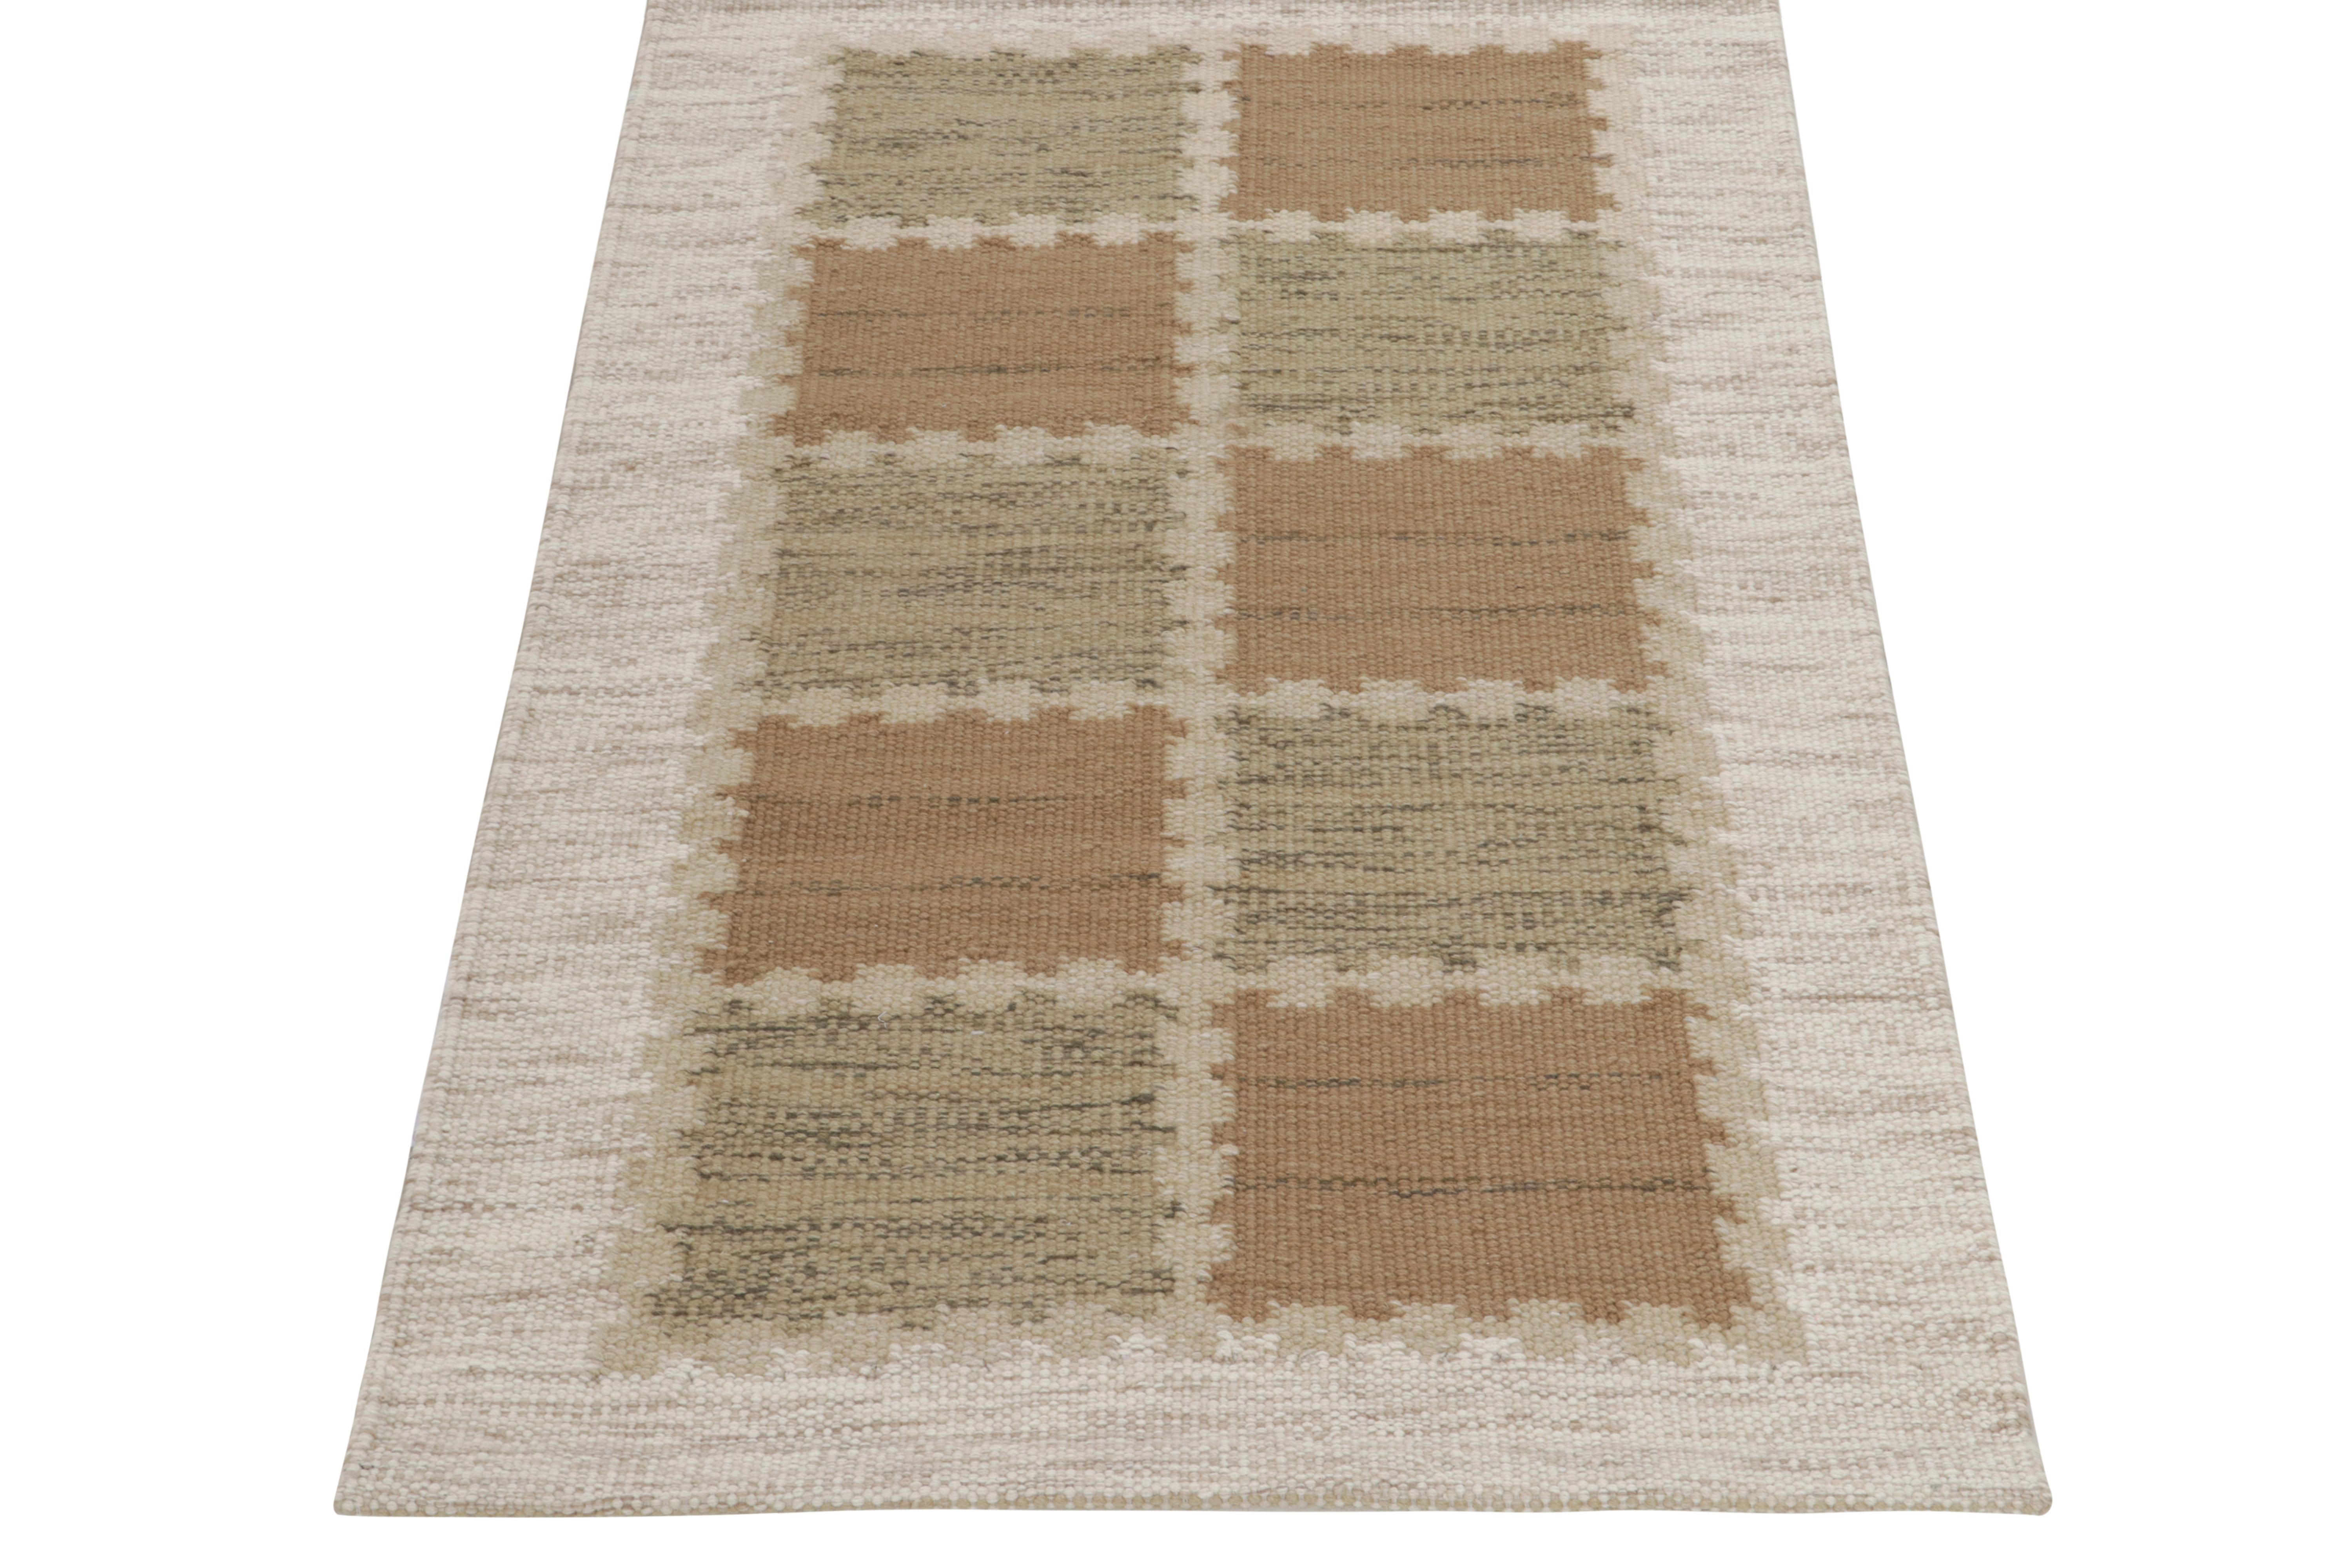 Handwoven in wool, a smart Swedish style kilim rug design from our award-winning Scandinavian flat weave collection. This 3x5 rug exemplifies a symmetric geometric pattern in alternating tones of subtle beige & brown resting comfortably on creamy